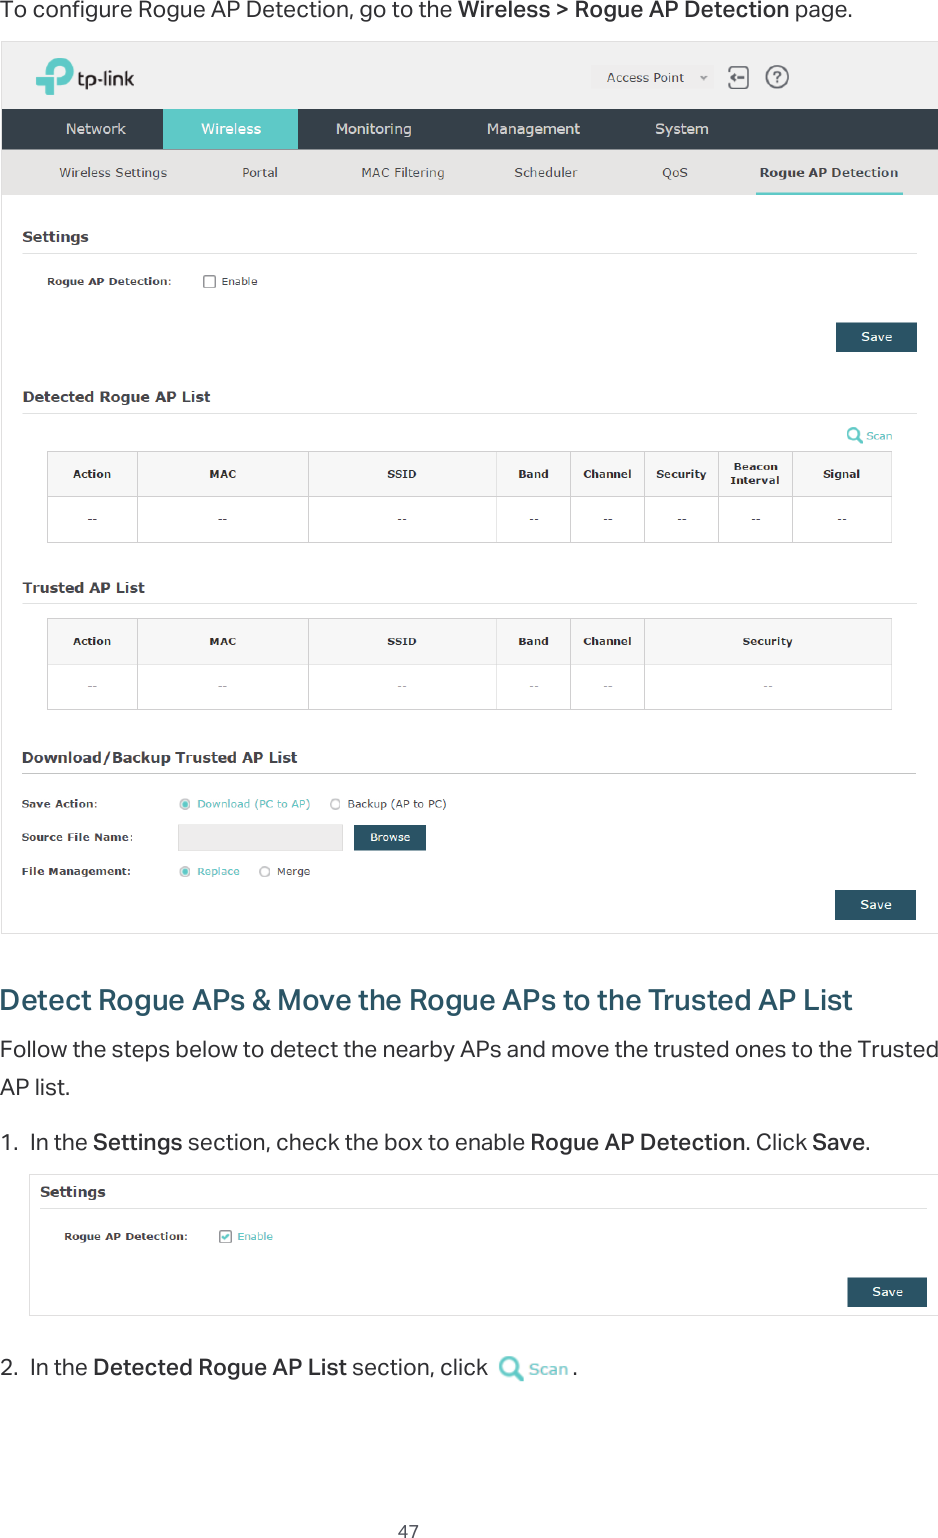  47To configure Rogue AP Detection, go to the Wireless &gt; Rogue AP Detection page.Detect Rogue APs &amp; Move the Rogue APs to the Trusted AP ListFollow the steps below to detect the nearby APs and move the trusted ones to the Trusted AP list.1. In the Settings section, check the box to enable Rogue AP Detection. Click Save.2. In the Detected Rogue AP List section, click  .